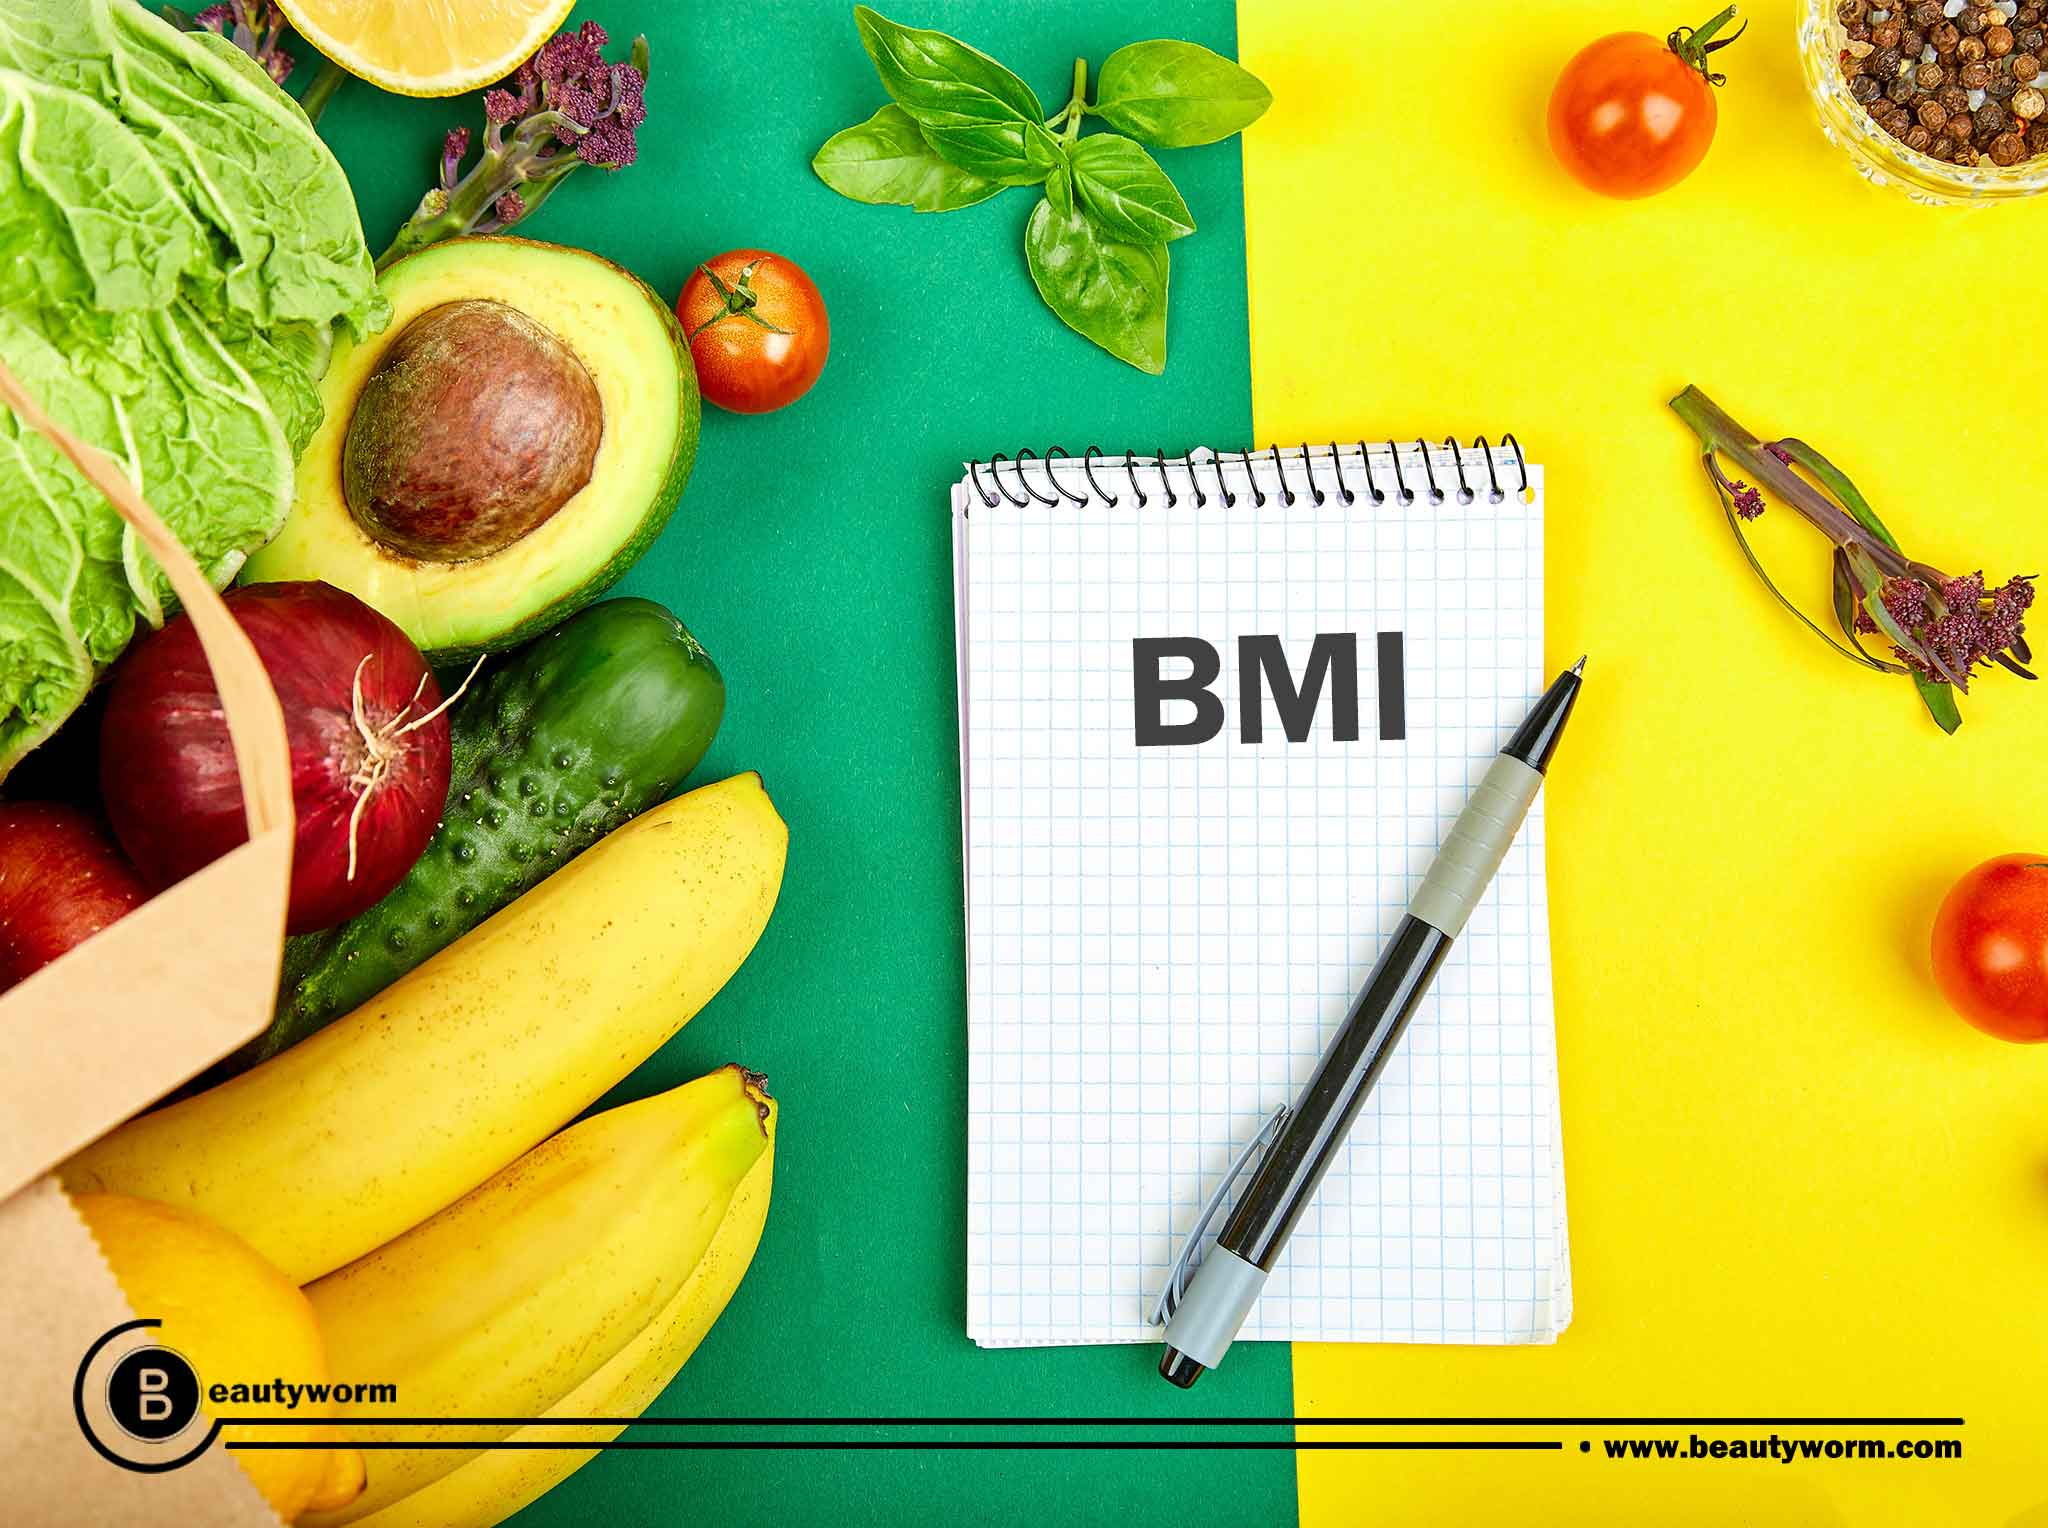 What is the benefit of using BMI measure?